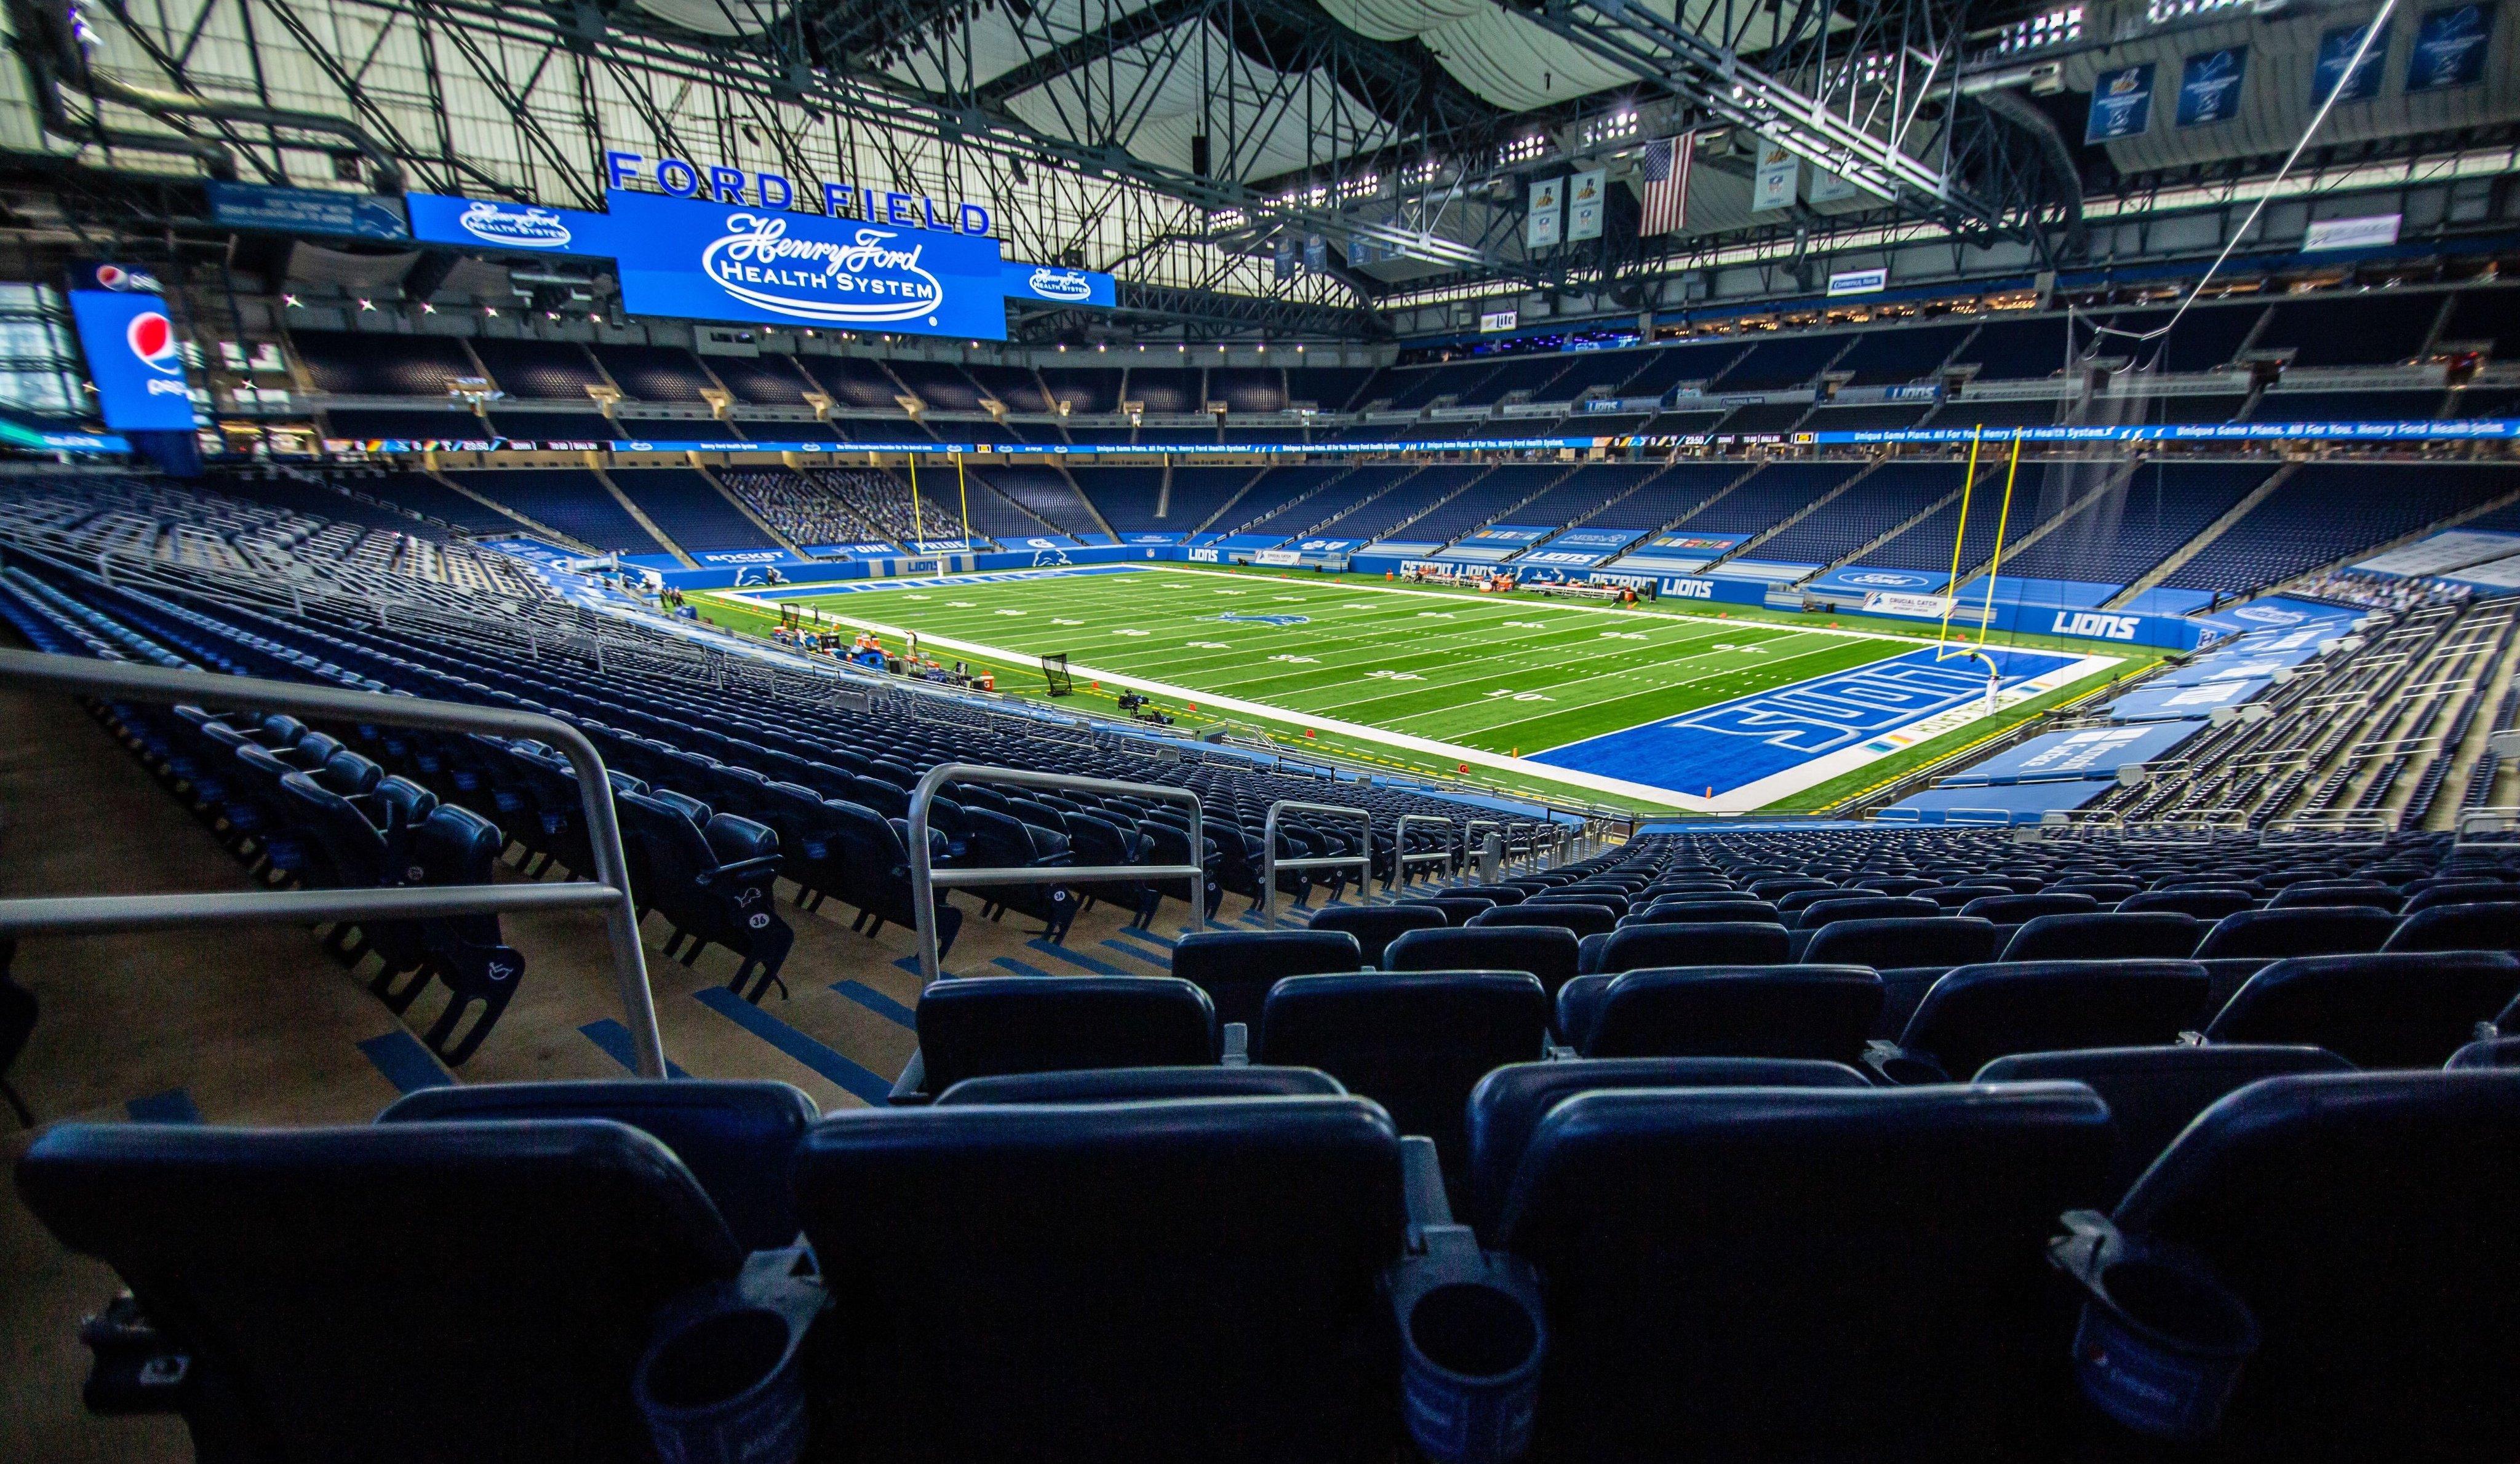 Could the Detroit Lions lose their Thanksgiving Day game?